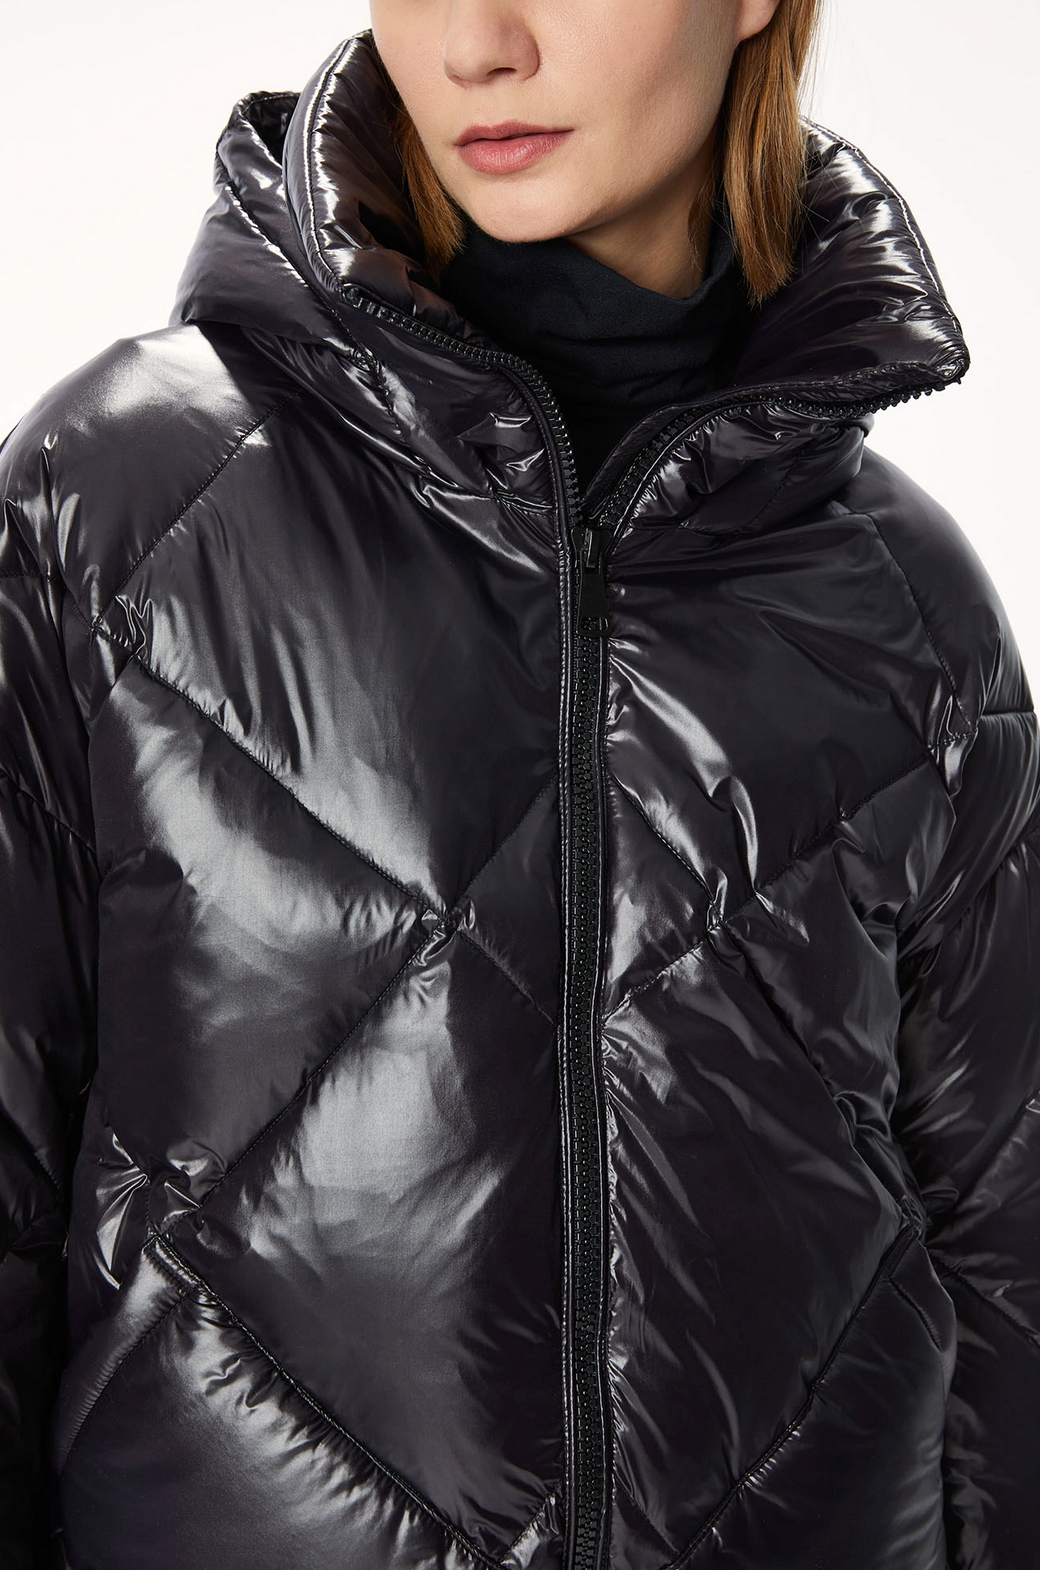 A woman donning a stylish black OOF puffer jacket 9000 with an oversized fit.